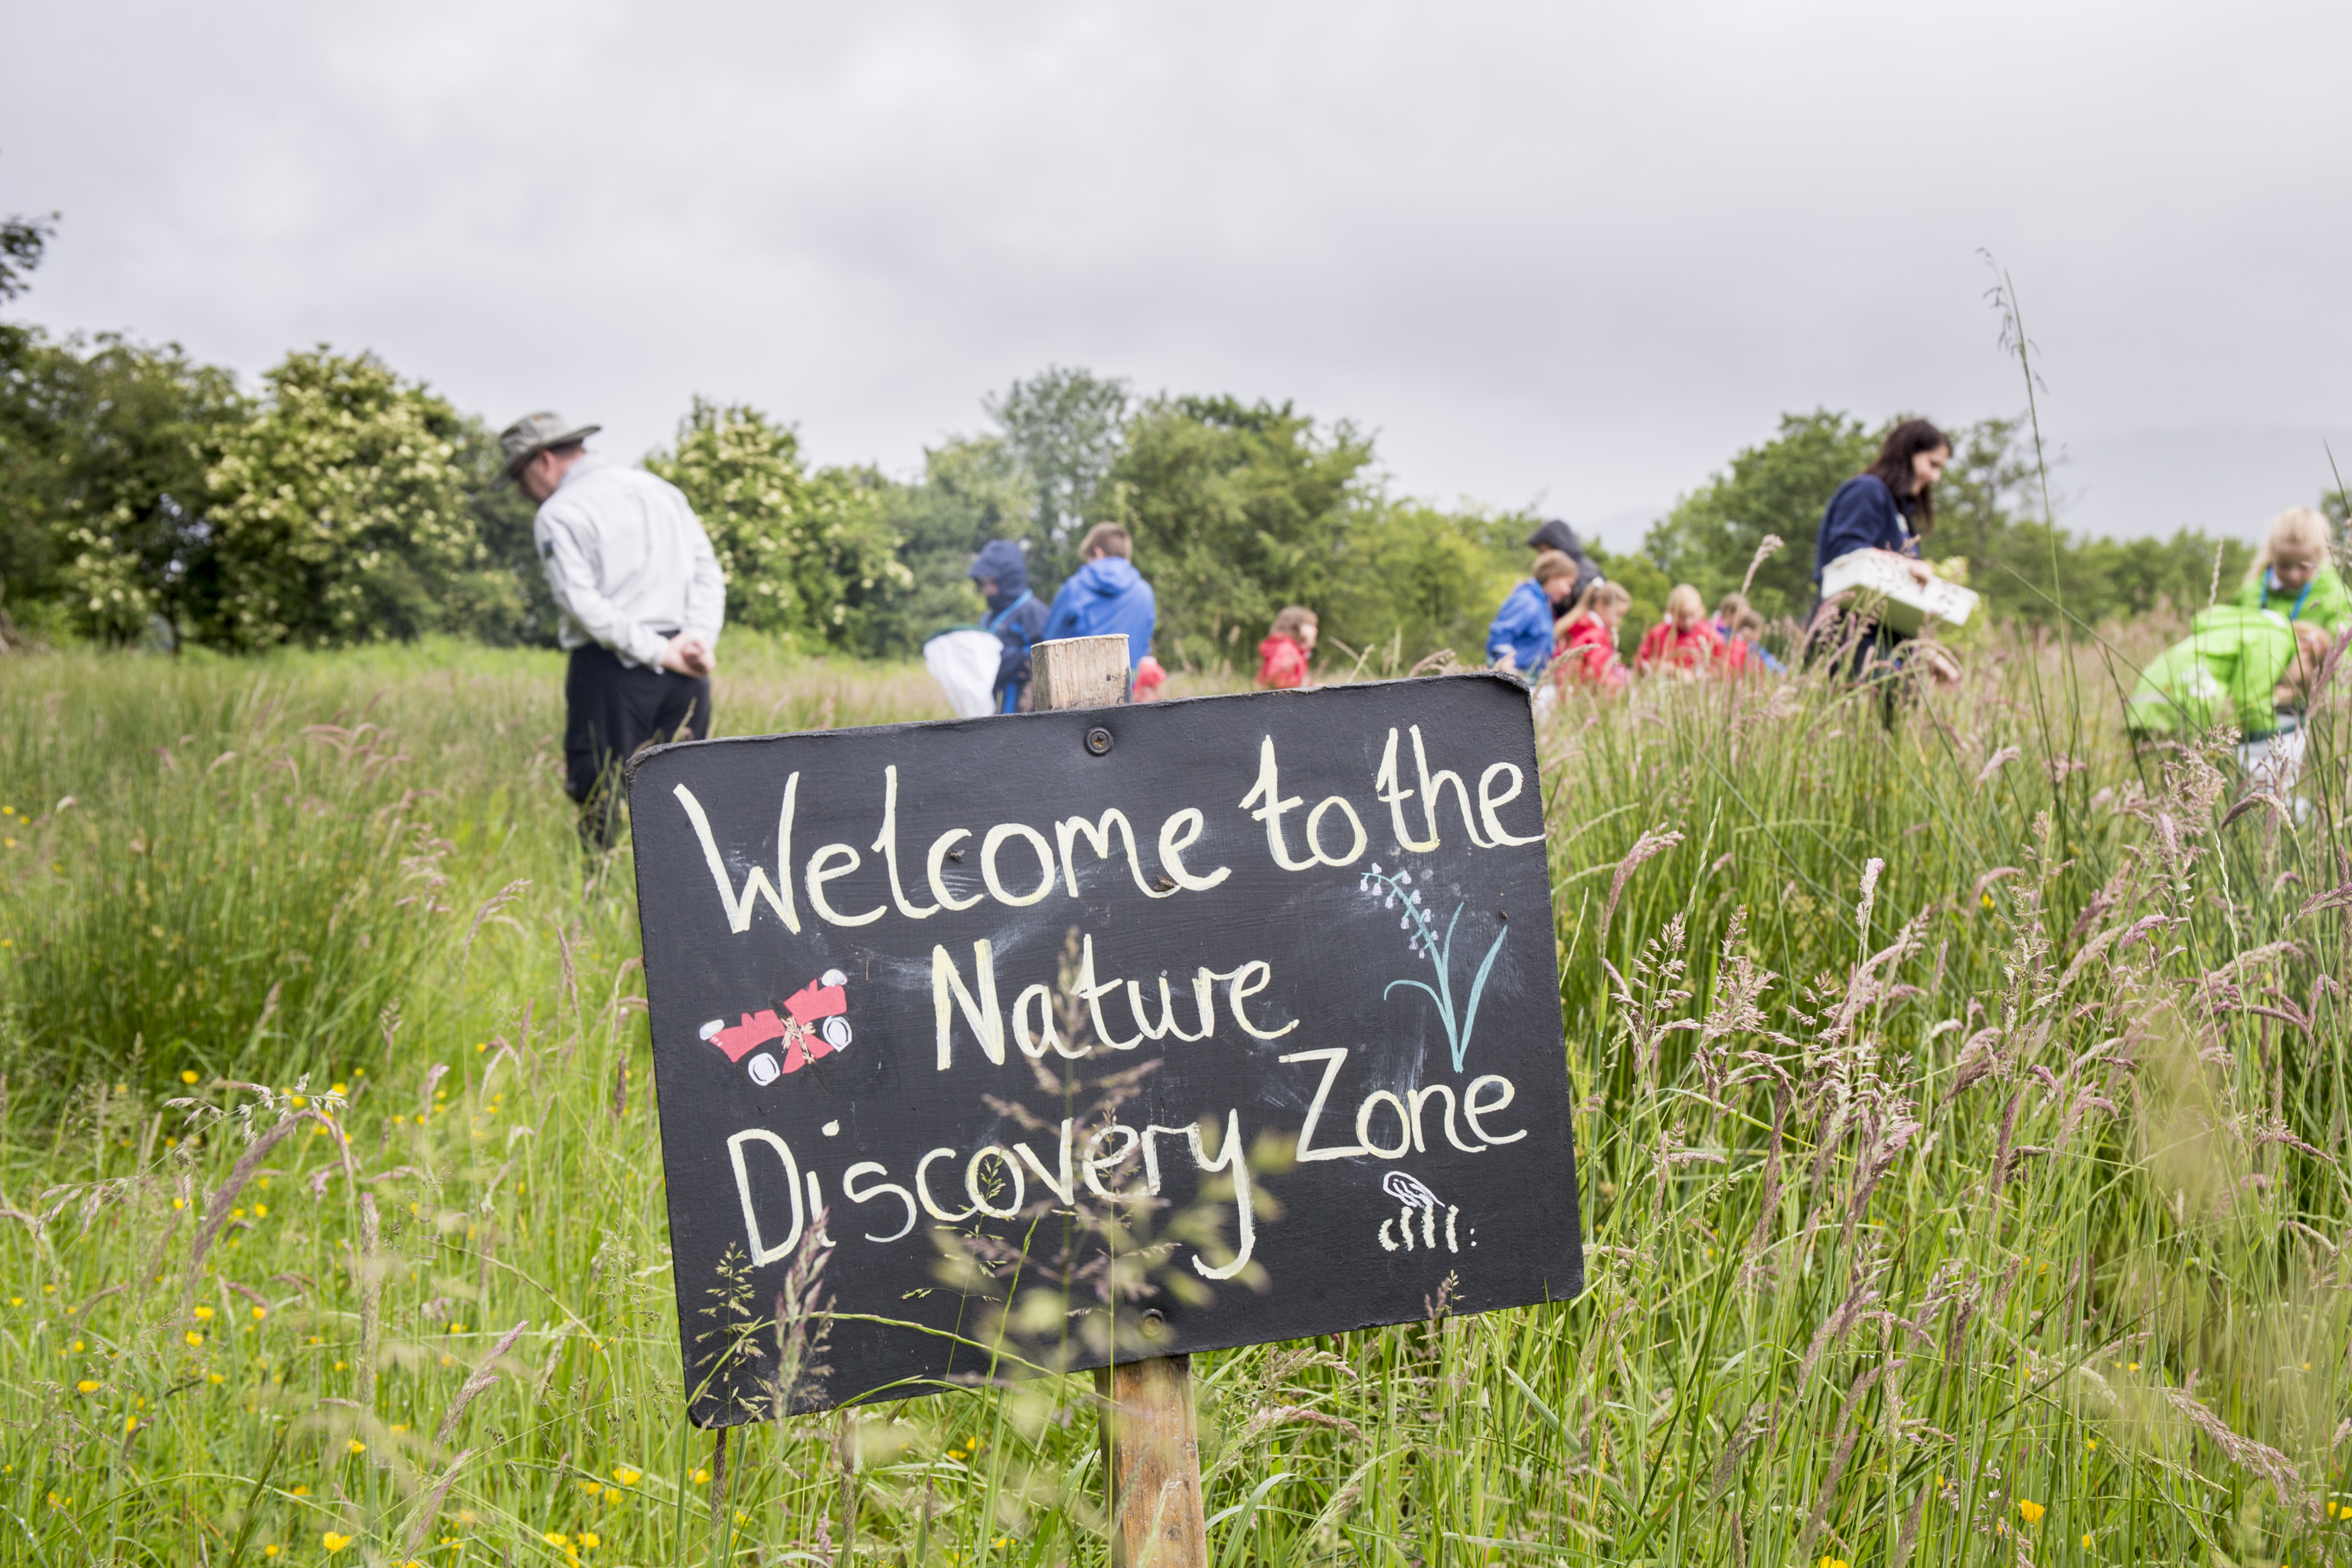 Children from Gartocharn Primary School at the Nature Discovery Zone at the RSPB Loch Lomond (David Palmar)